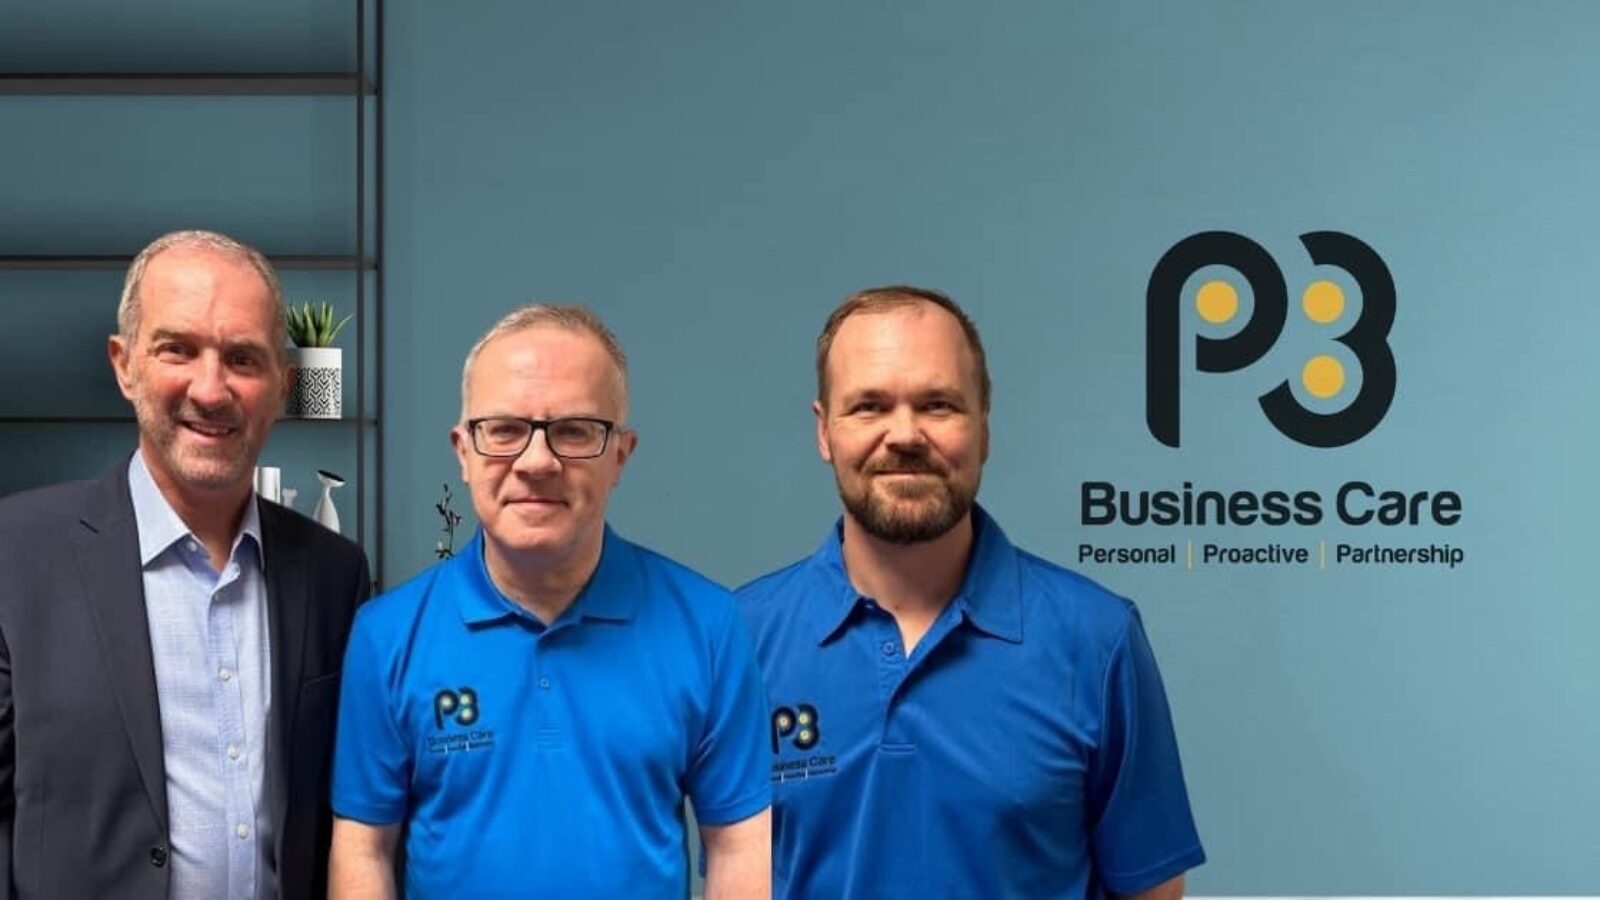 P3 Business Care welcome two new members to the team